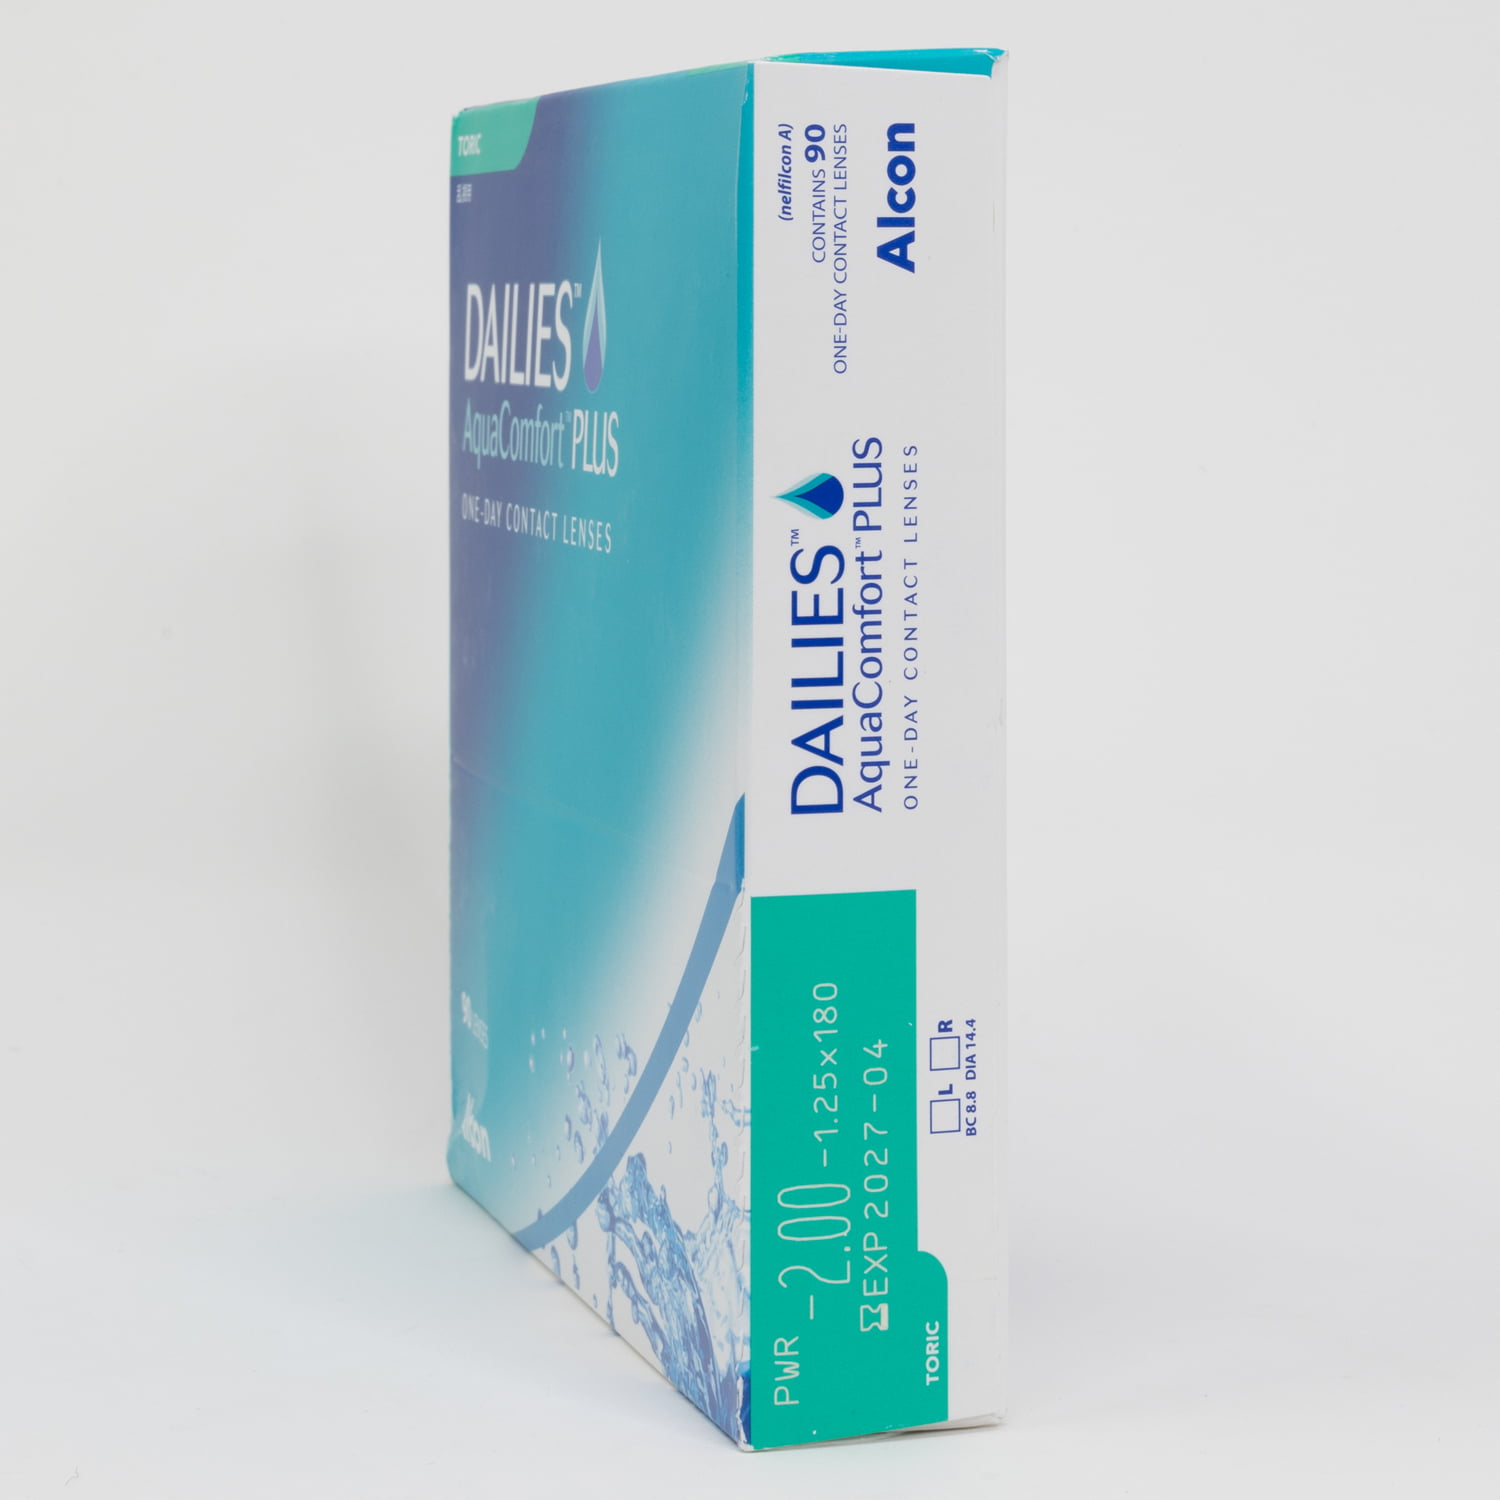 dailies-aquacomfort-plus-toric-90-pack-deliver-contacts